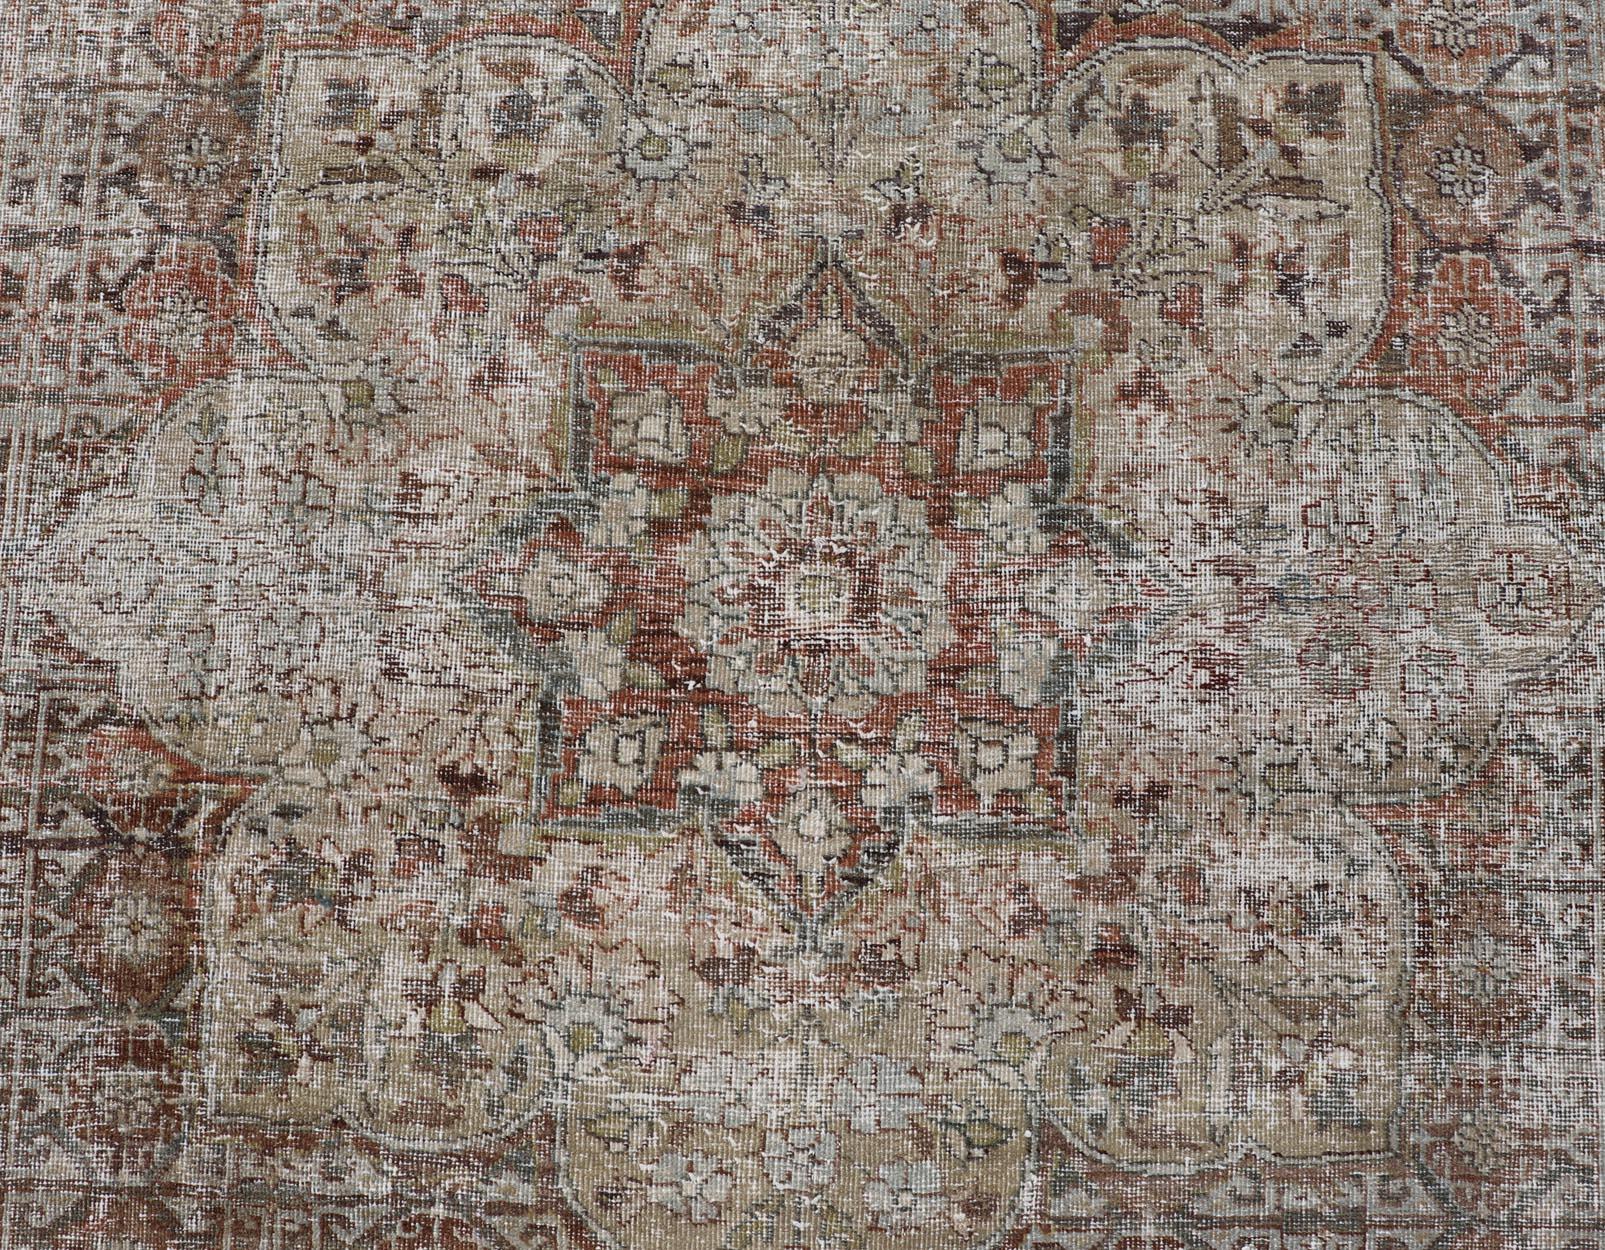 This antique distressed Persian Mahal rug has been hand-knotted in wool and features a large medallion design rendered in muted tones, a complementary, multi-tiered border encompasses the entirety of the piece; making it a marvelous fit for a wide